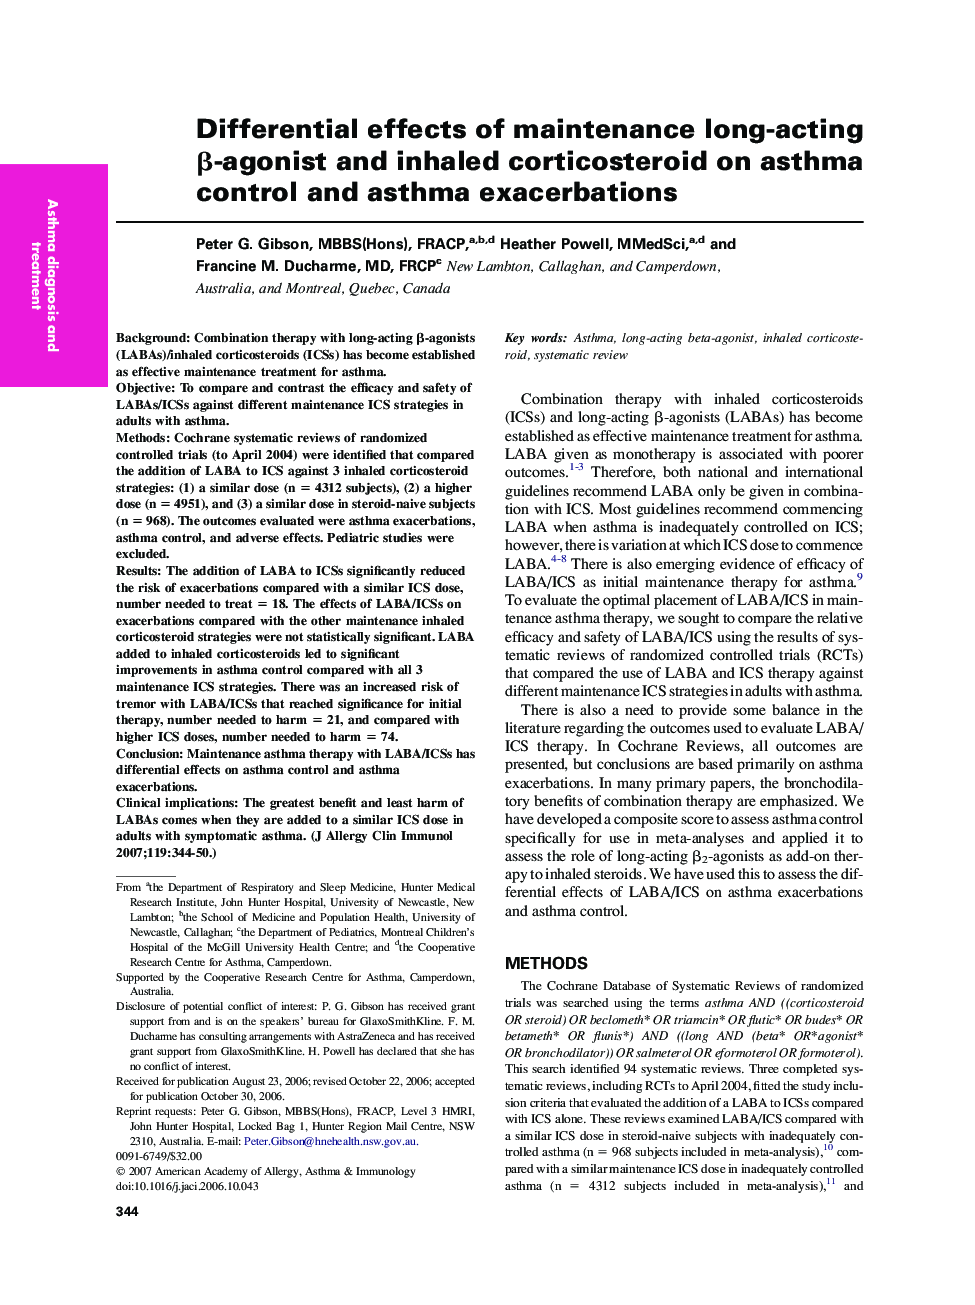 Differential effects of maintenance long-acting β-agonist and inhaled corticosteroid on asthma control and asthma exacerbations 